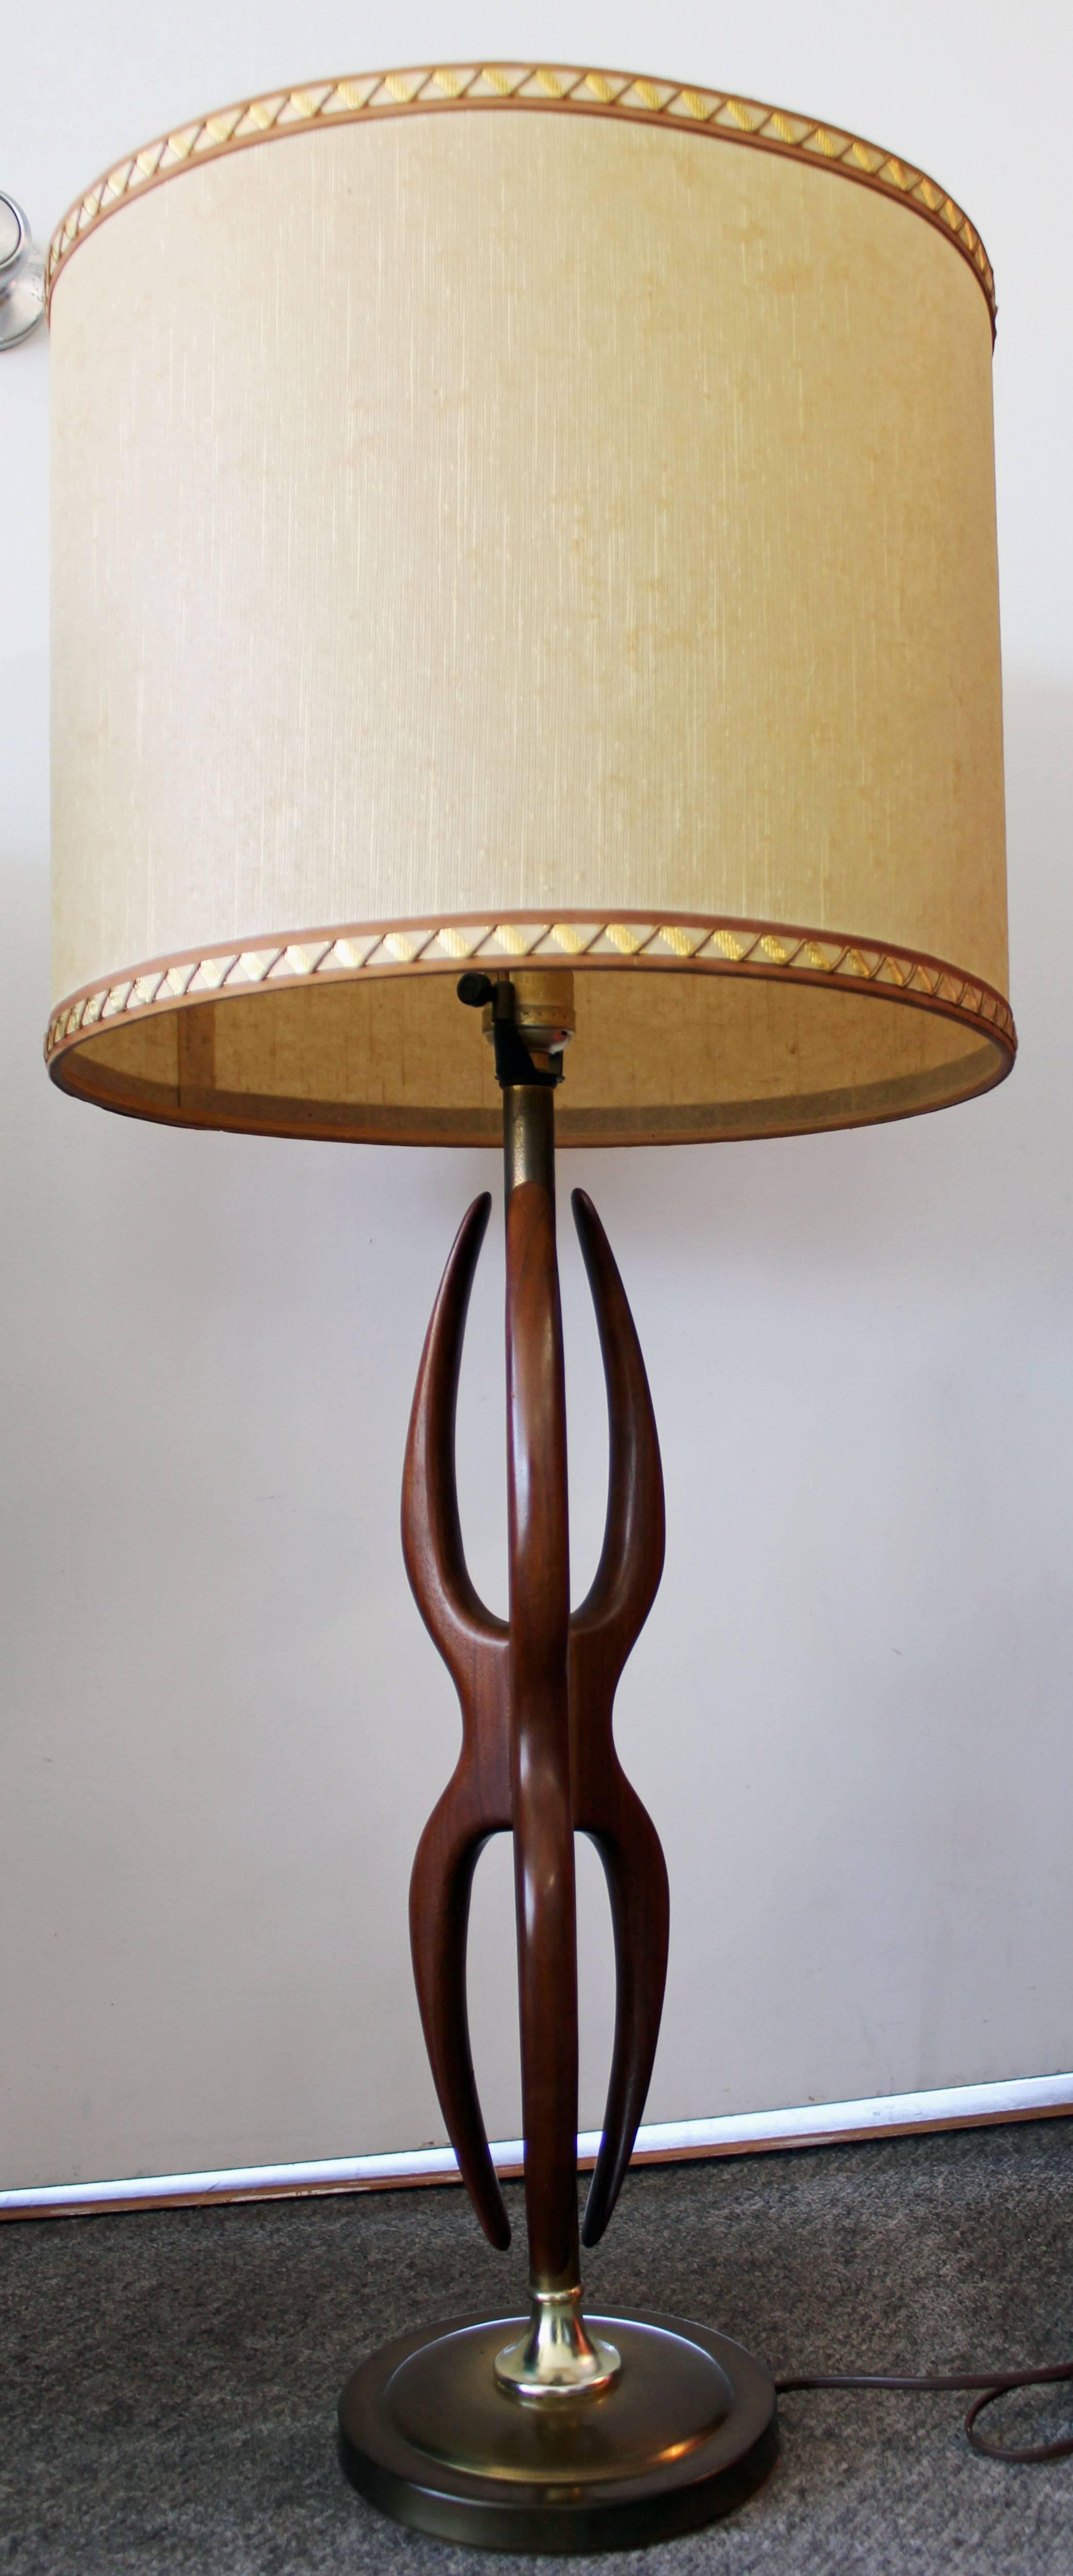 Offered is a Mid-Century Modern amorphous-shaped table lamp, made of walnut and brass. It is in excellent working condition. Shade is not included, for display purposes only.